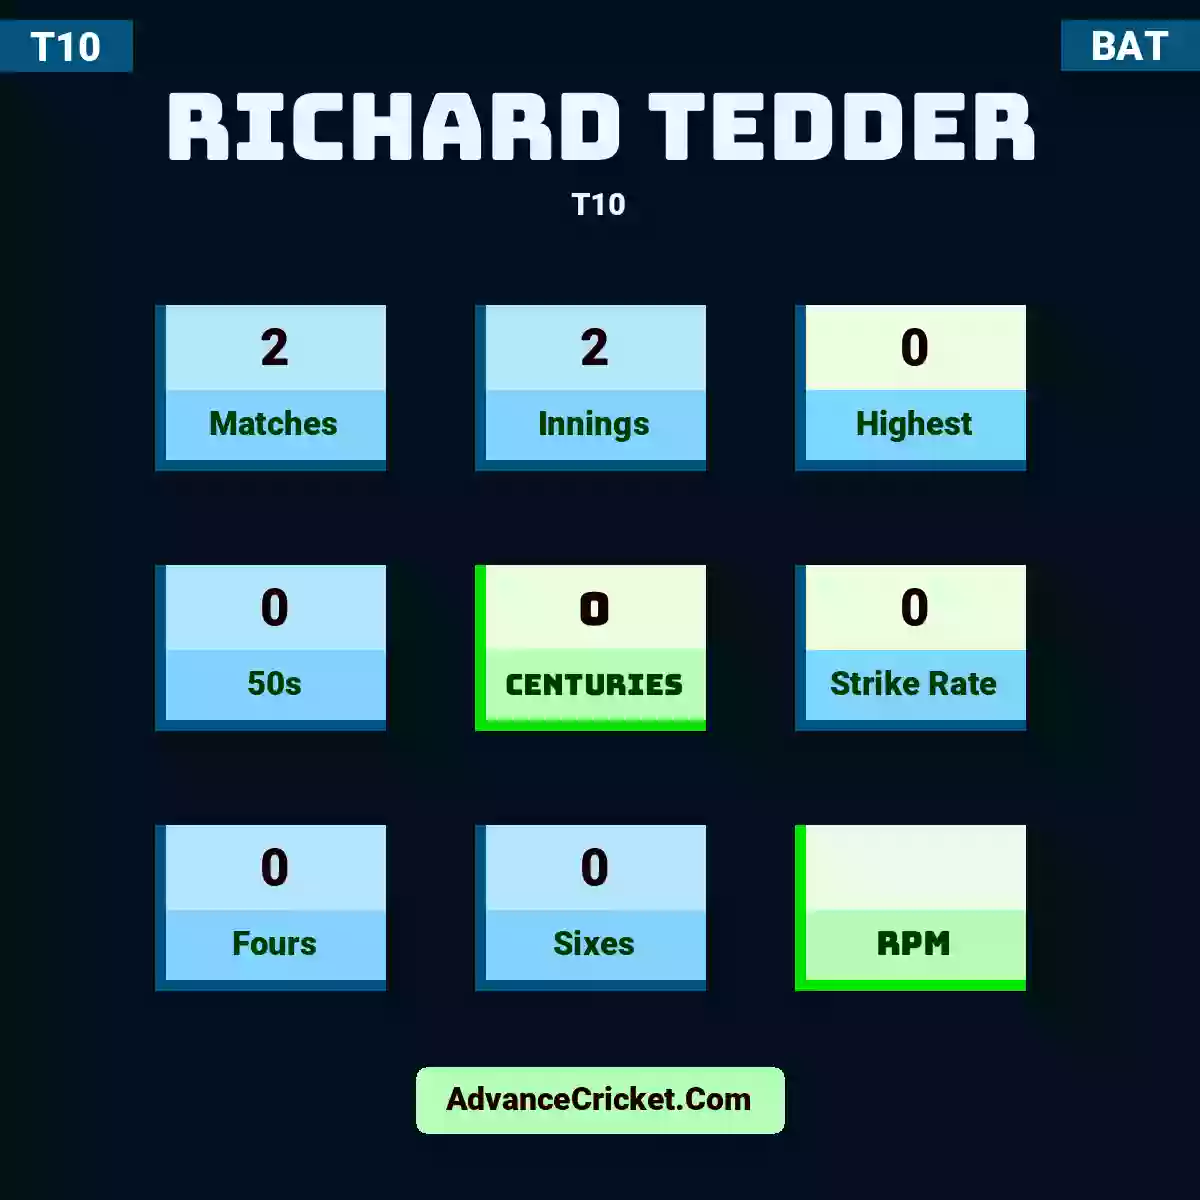 Richard Tedder T10 , Richard Tedder played 2 matches, scored 0 runs as highest, 0 half-centuries, and 0 centuries, with a strike rate of 0. R.Tedder hit 0 fours and 0 sixes.